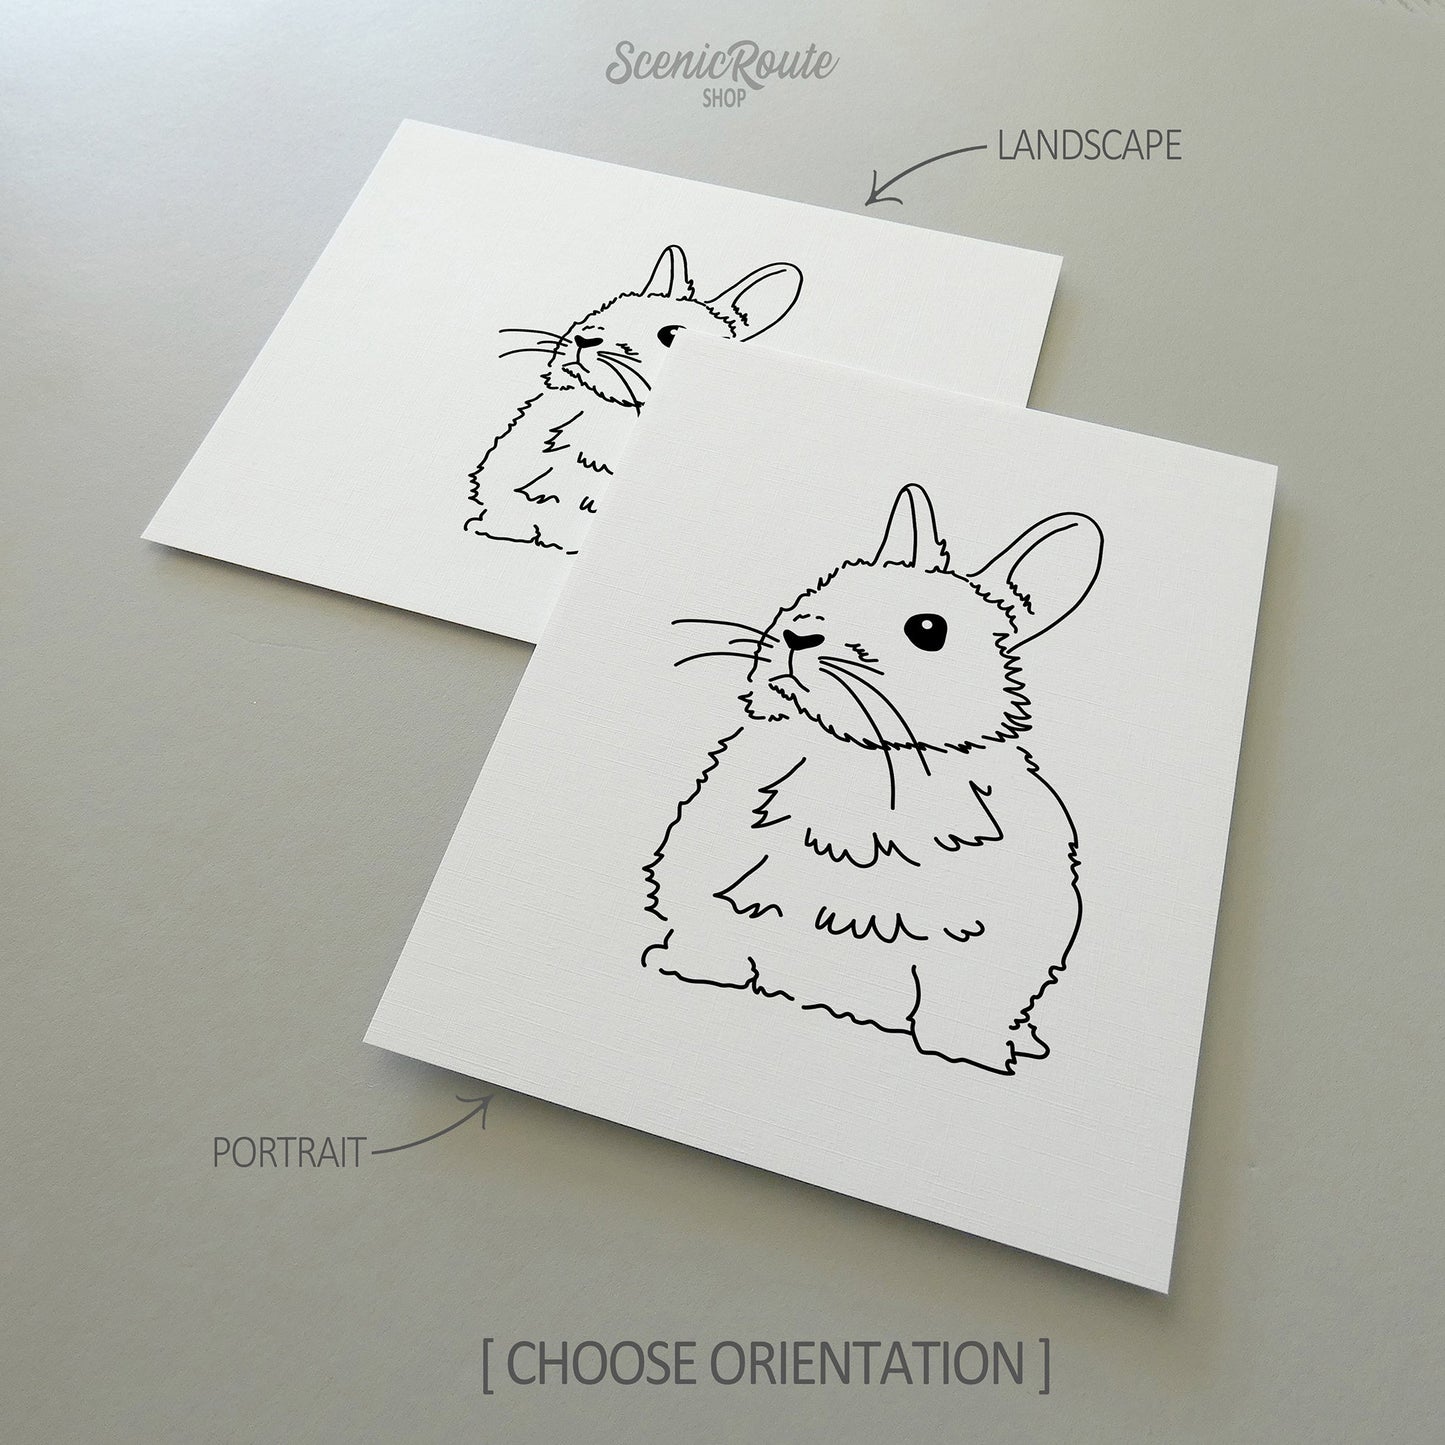 Two line art drawings of a Netherland Dwarf Rabbit on white linen paper with a gray background.  The pieces are shown in portrait and landscape orientation for the available art print options.